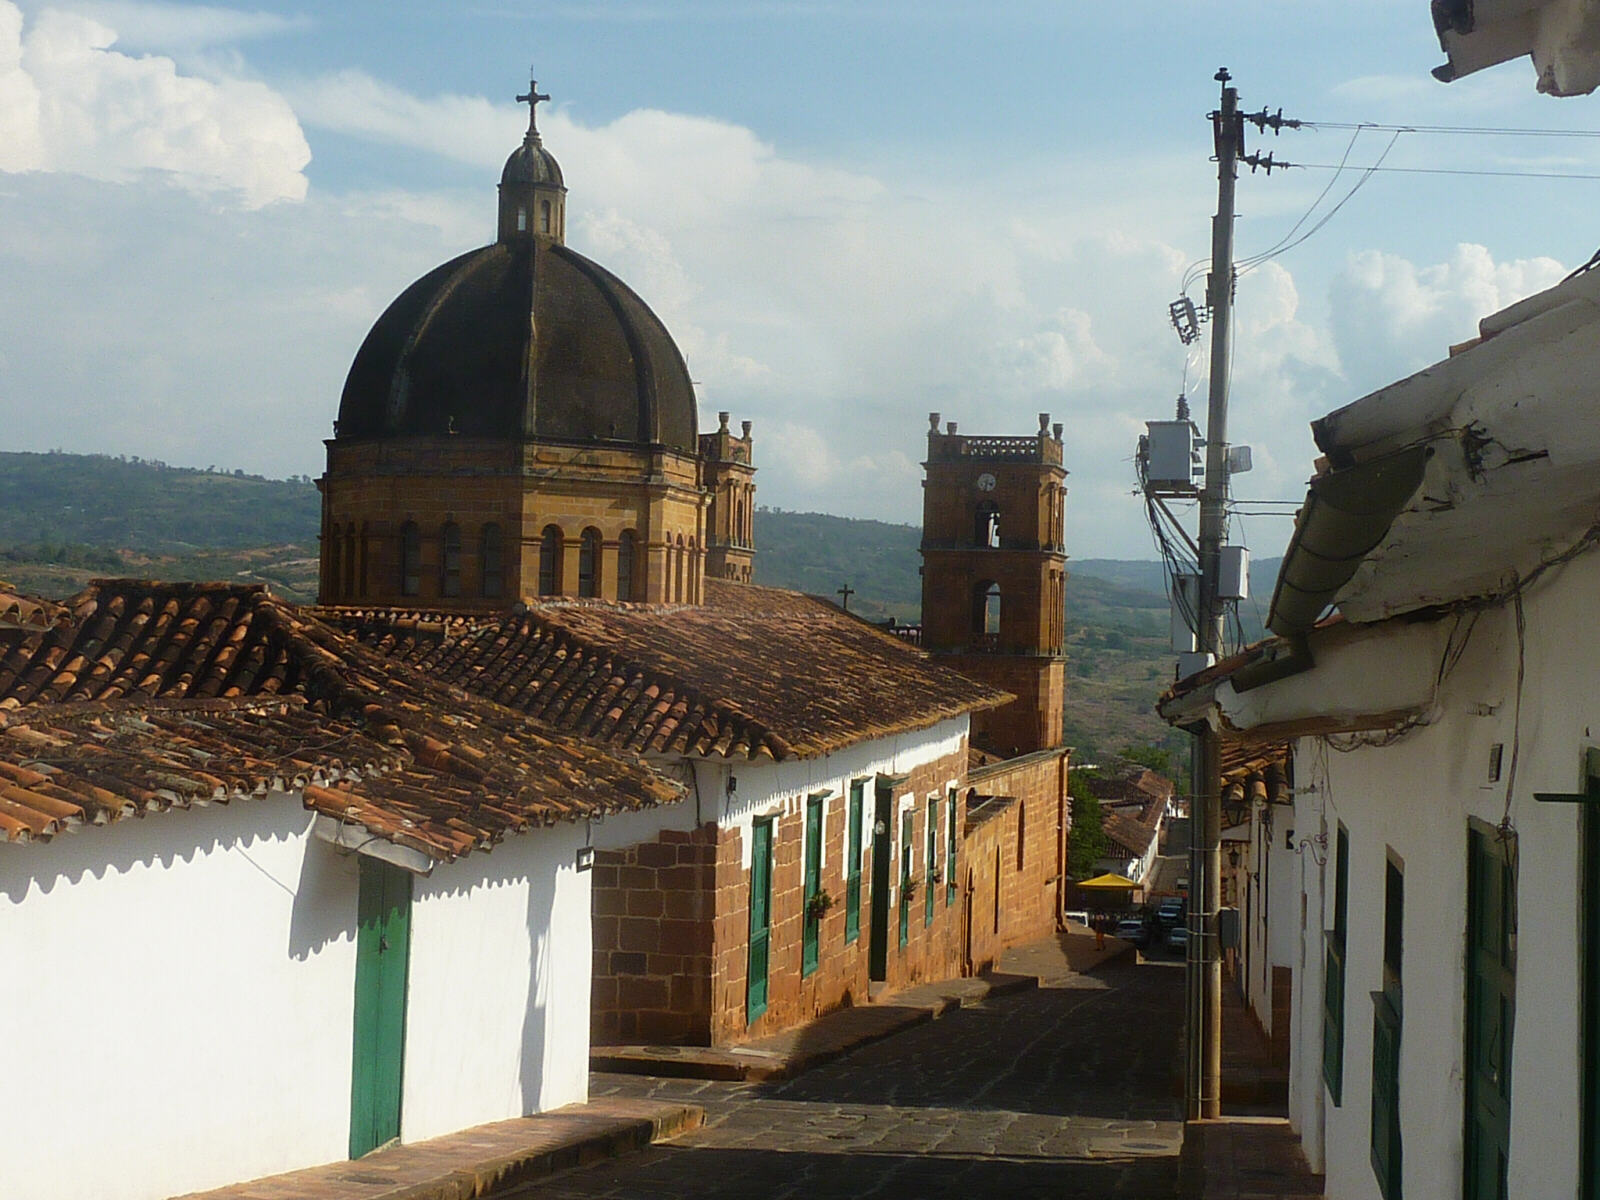 The cathedral in Barichara, Colombia